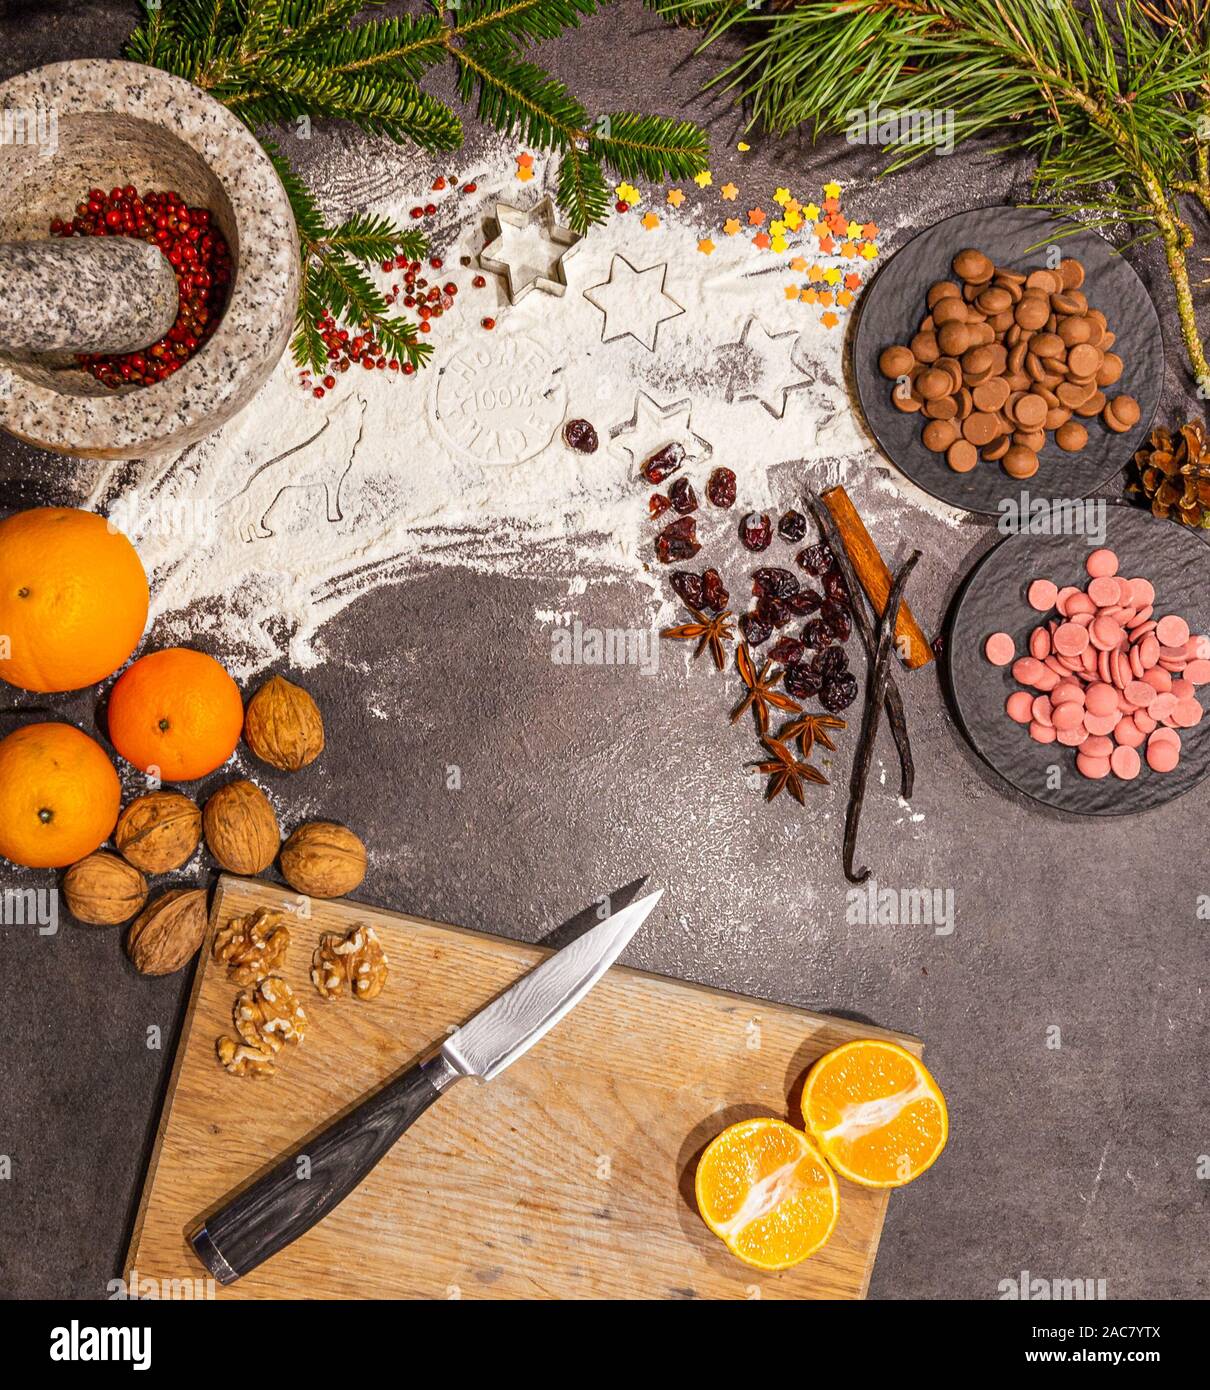 Delicious and beautiful handmade flat lay for christmas baking with chocolate chips, oranges, nuts, cinnamon cranberries vanilla and other decoration. Stock Photo